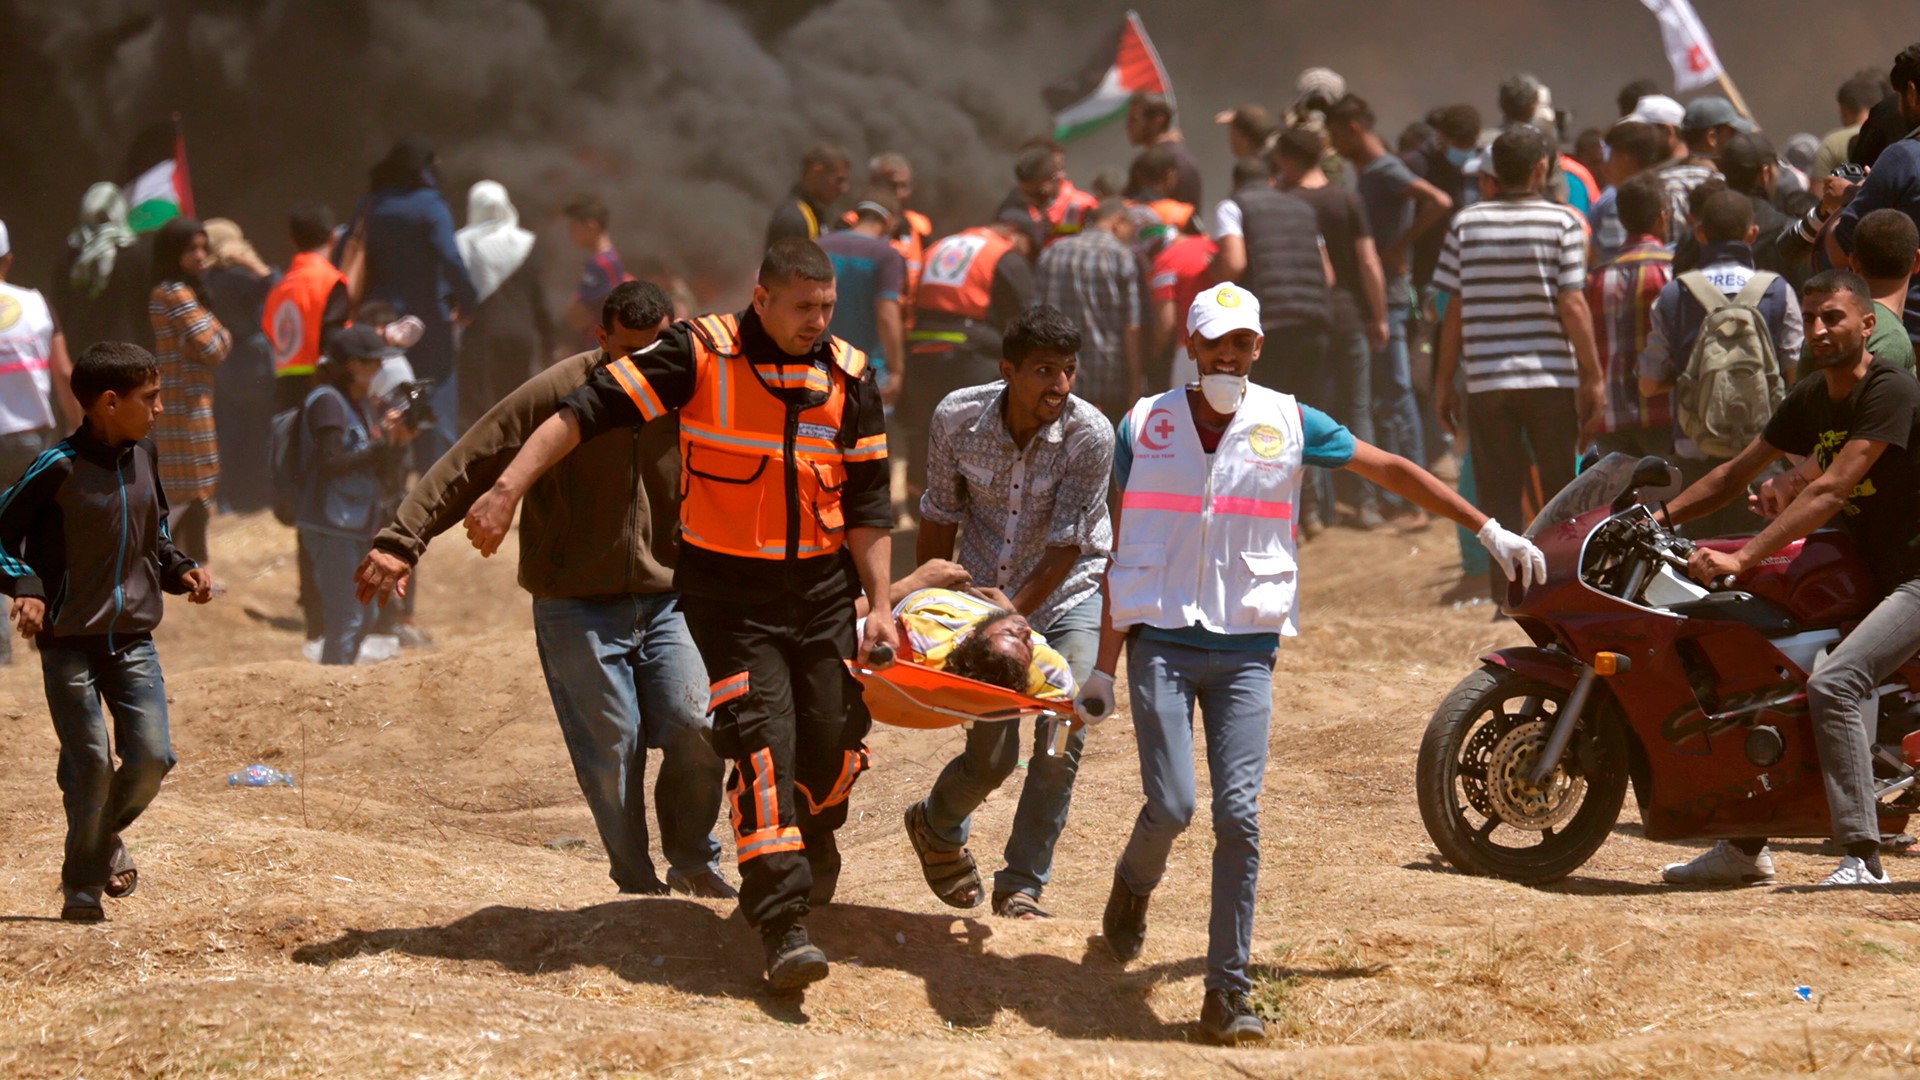 More than 40 Palestinian protesters have been killed by Israeli fire as outcry mounts ahead of the U.S. Embassy's opening in Jerusalem.